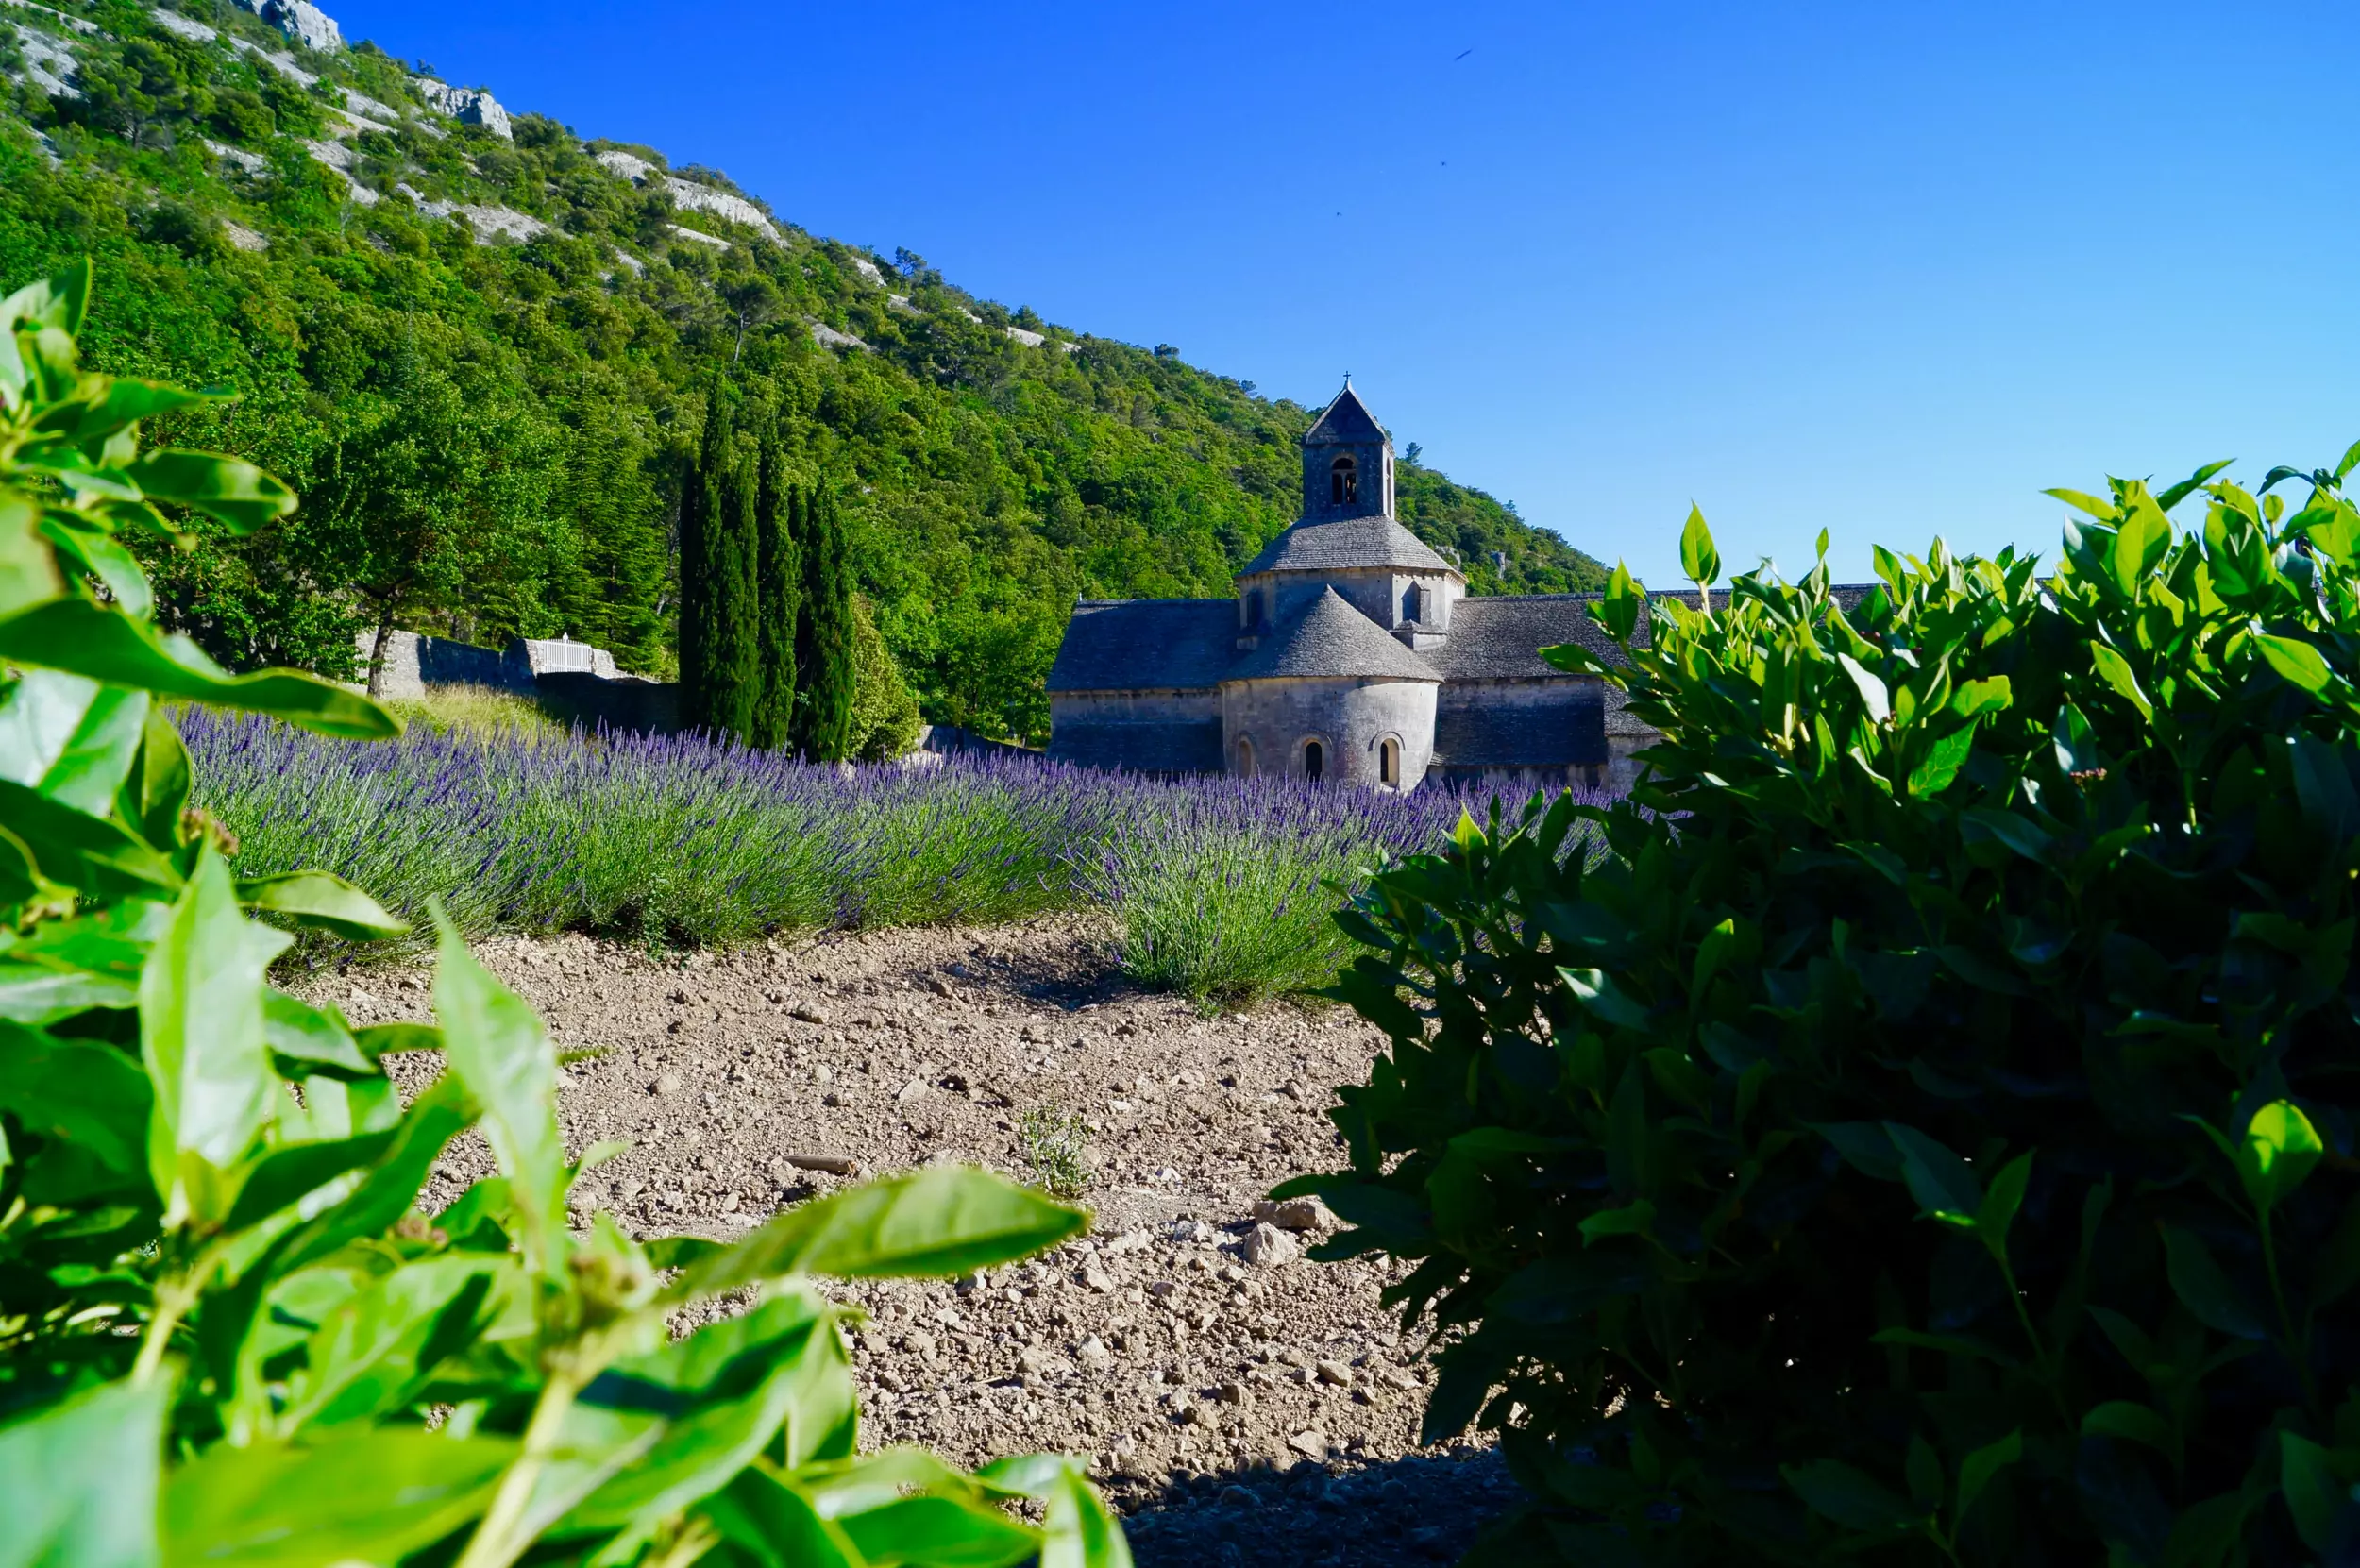 The villages of the Luberon